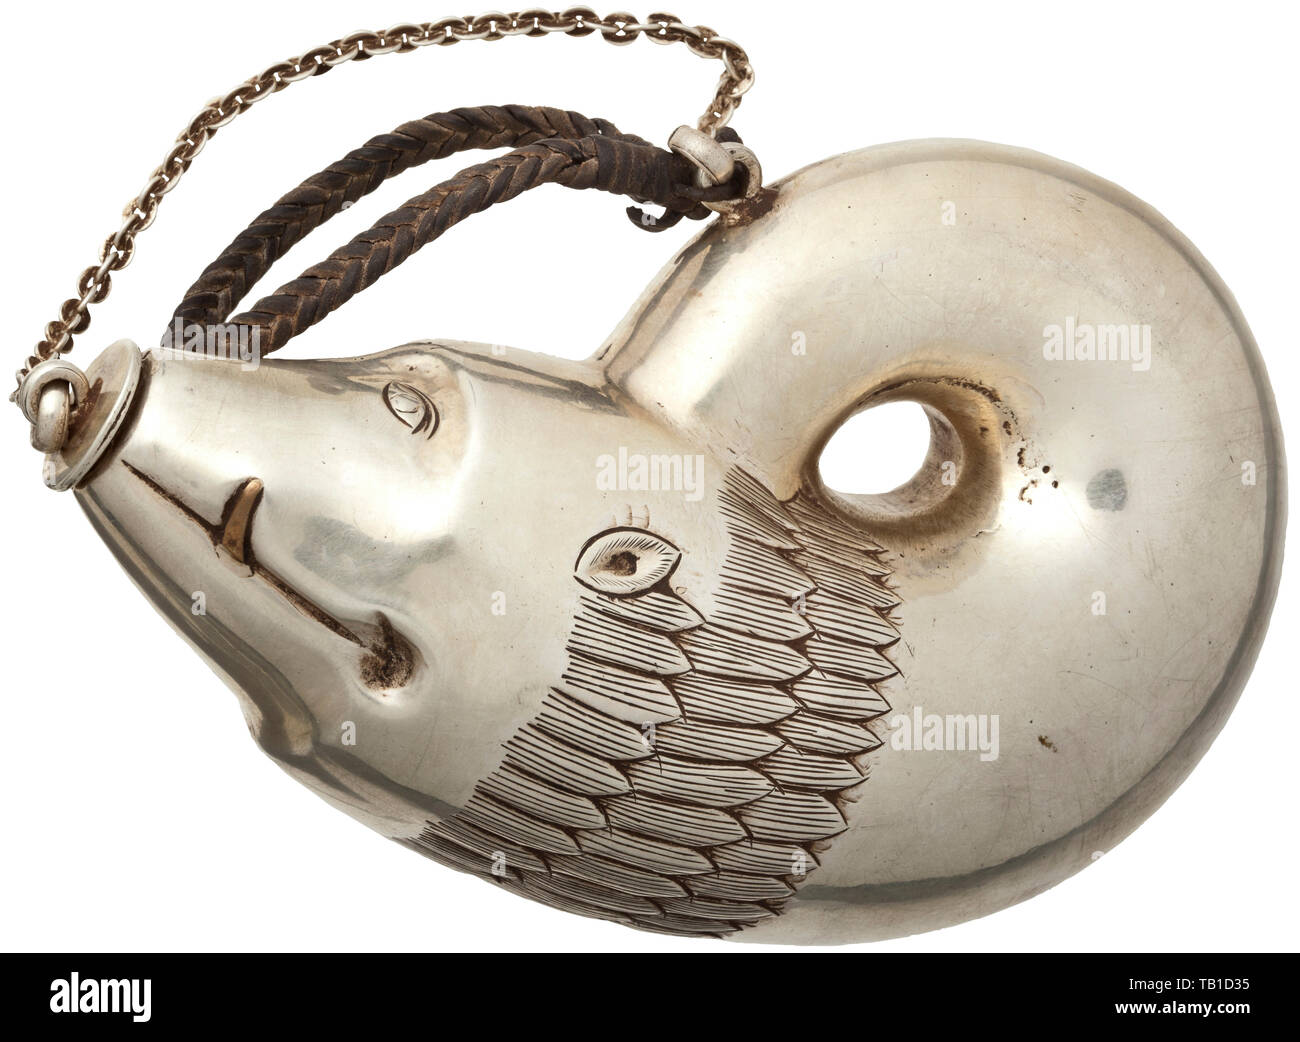 An Indian silver powder horn, Malwar, 19th century, Hollow powder horn in the form of a nautilus shell. The spout shaped like a stylised boar's head with engraved fur pattern and inserted brass tusks. Attached chain with silver plug. Length 16 cm, weight 262 g. historic, historical 19th century, Additional-Rights-Clearance-Info-Not-Available Stock Photo